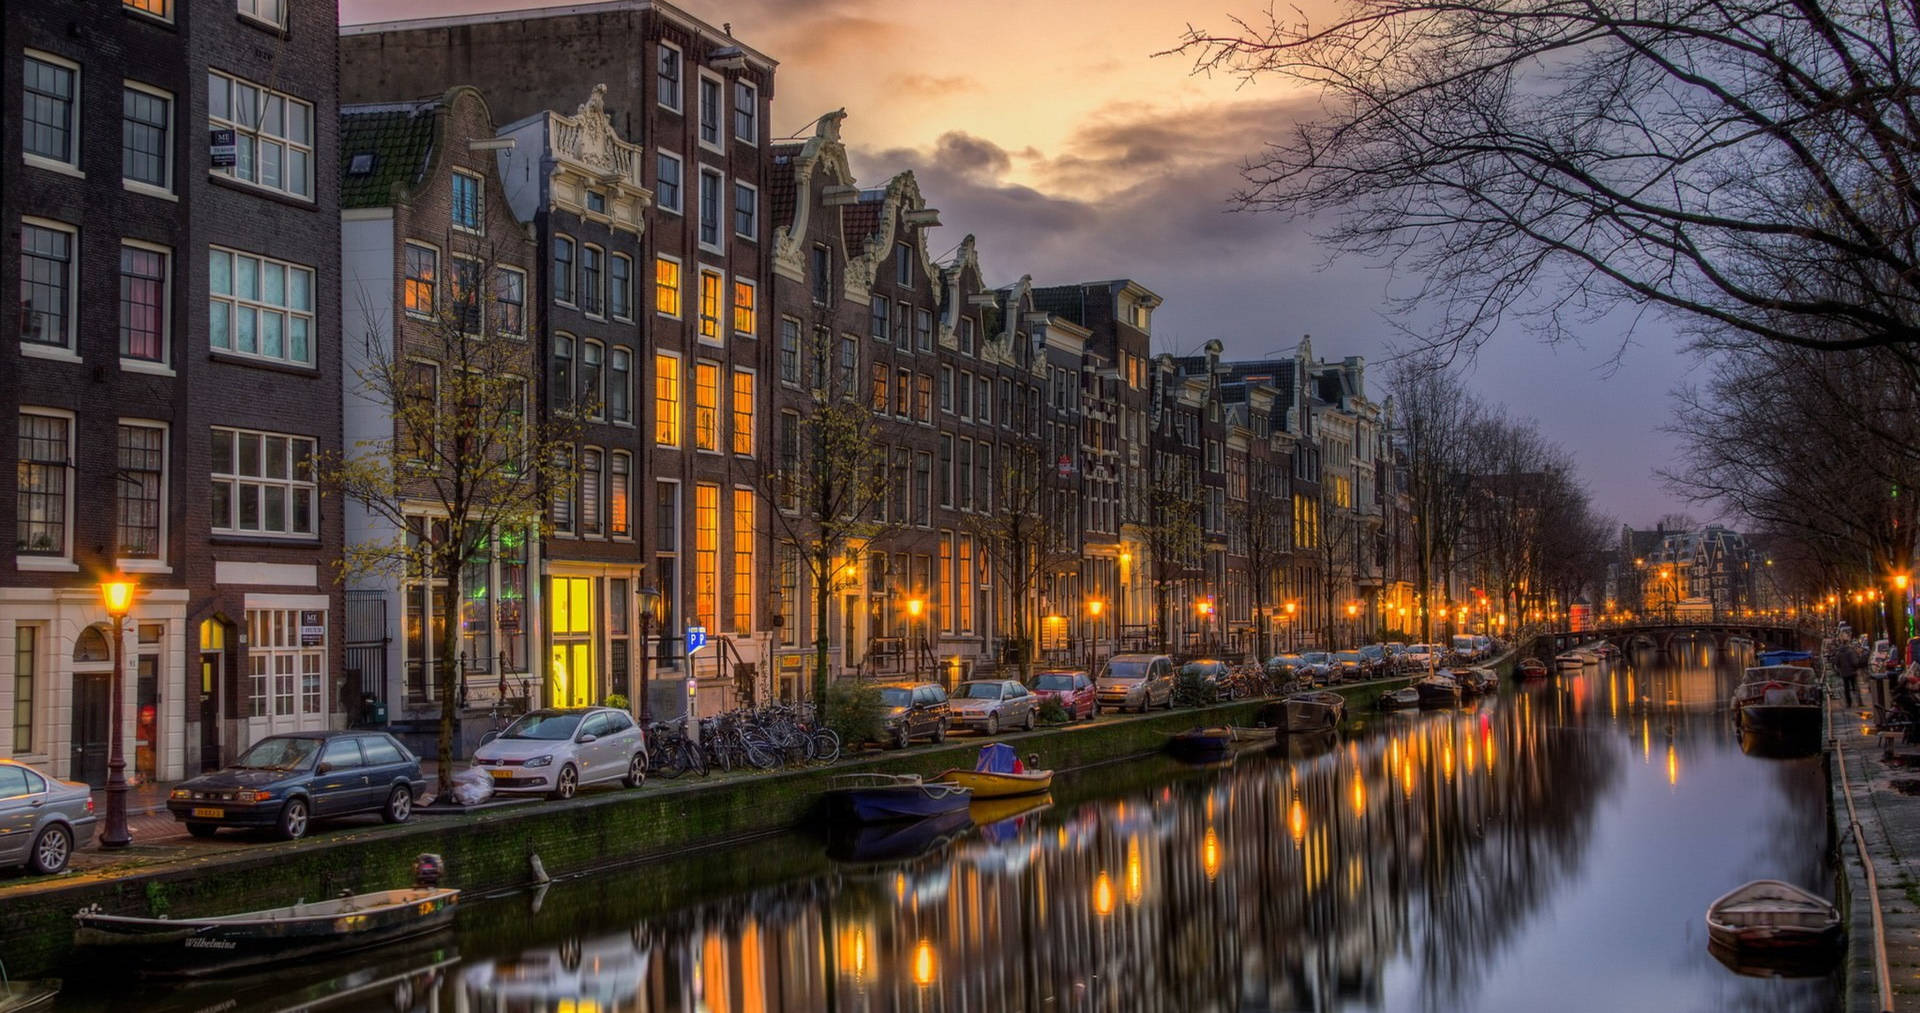 Evening Lights By Amsterdam Canal Background